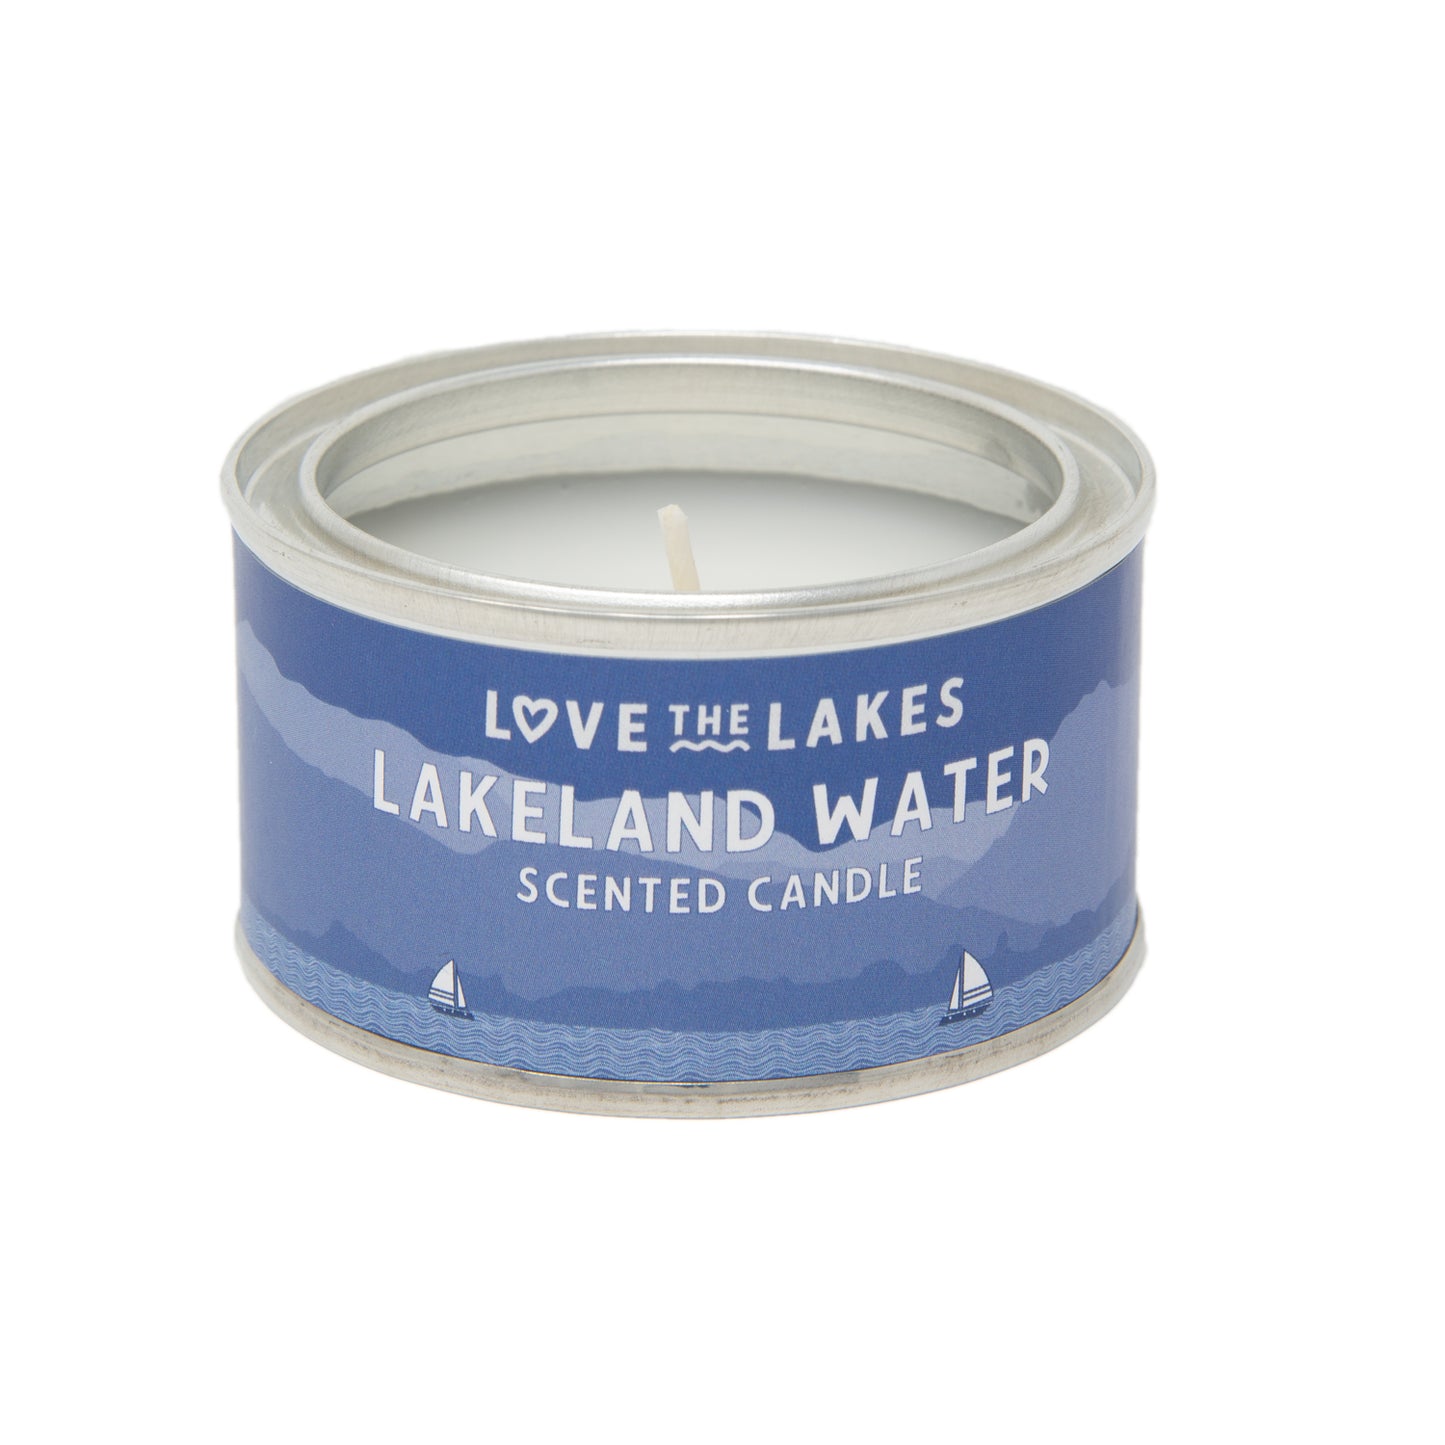 Love the Lakes Lakeland Water Candle - 3 sizes